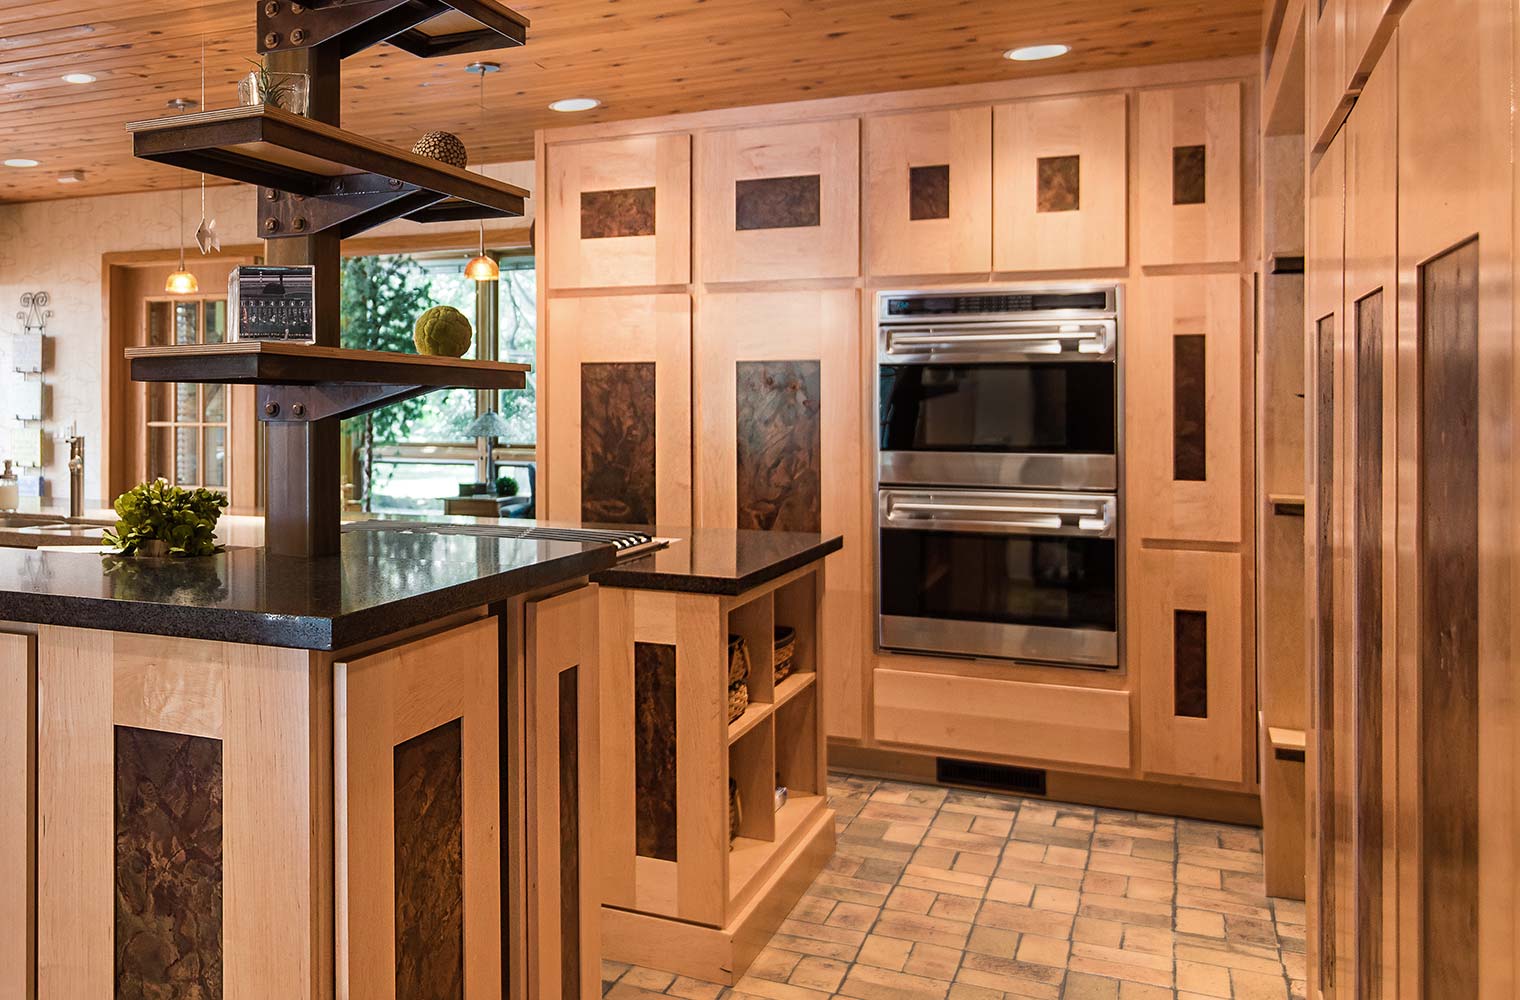 custom cabinets in maple with steel inserts in Johnston, IA kitchen remodel by Silent Rivers Design+Build